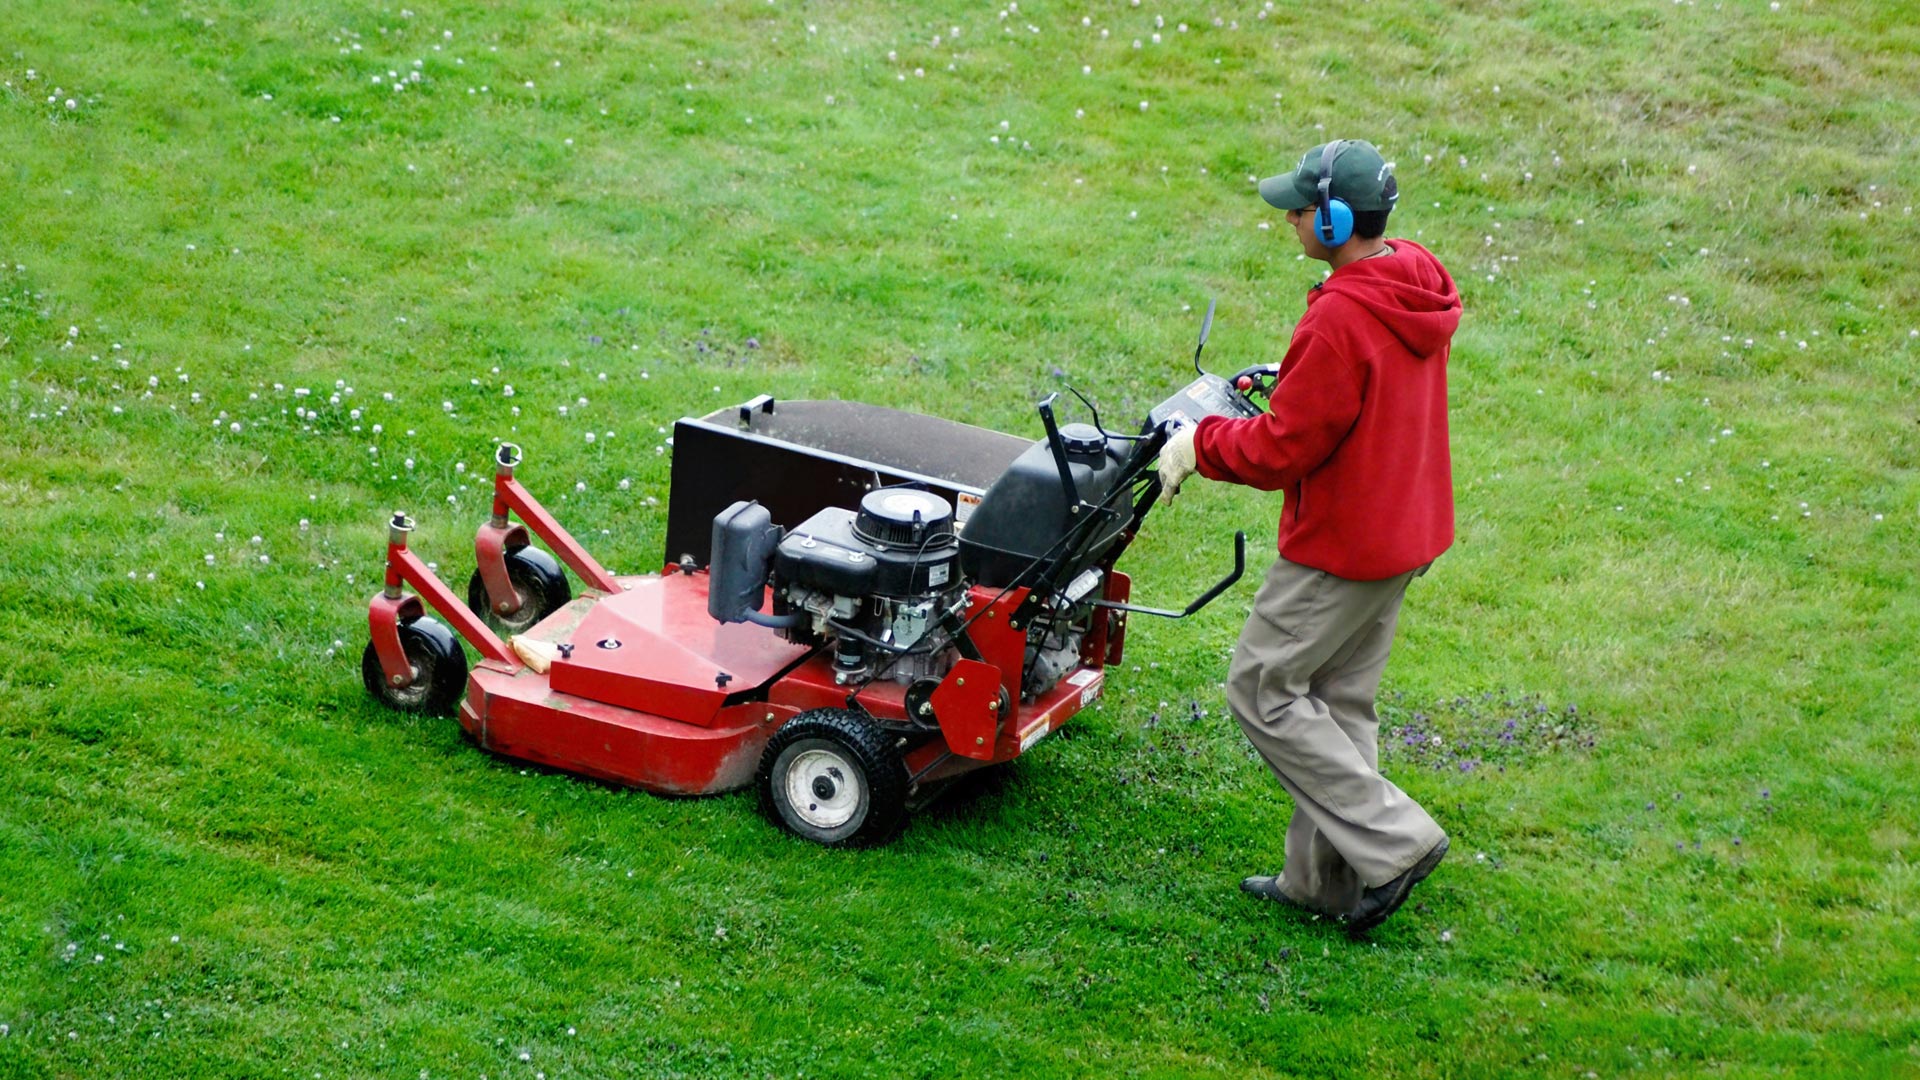 One of our employees mowing a large property, join our team of lawn care technicians.